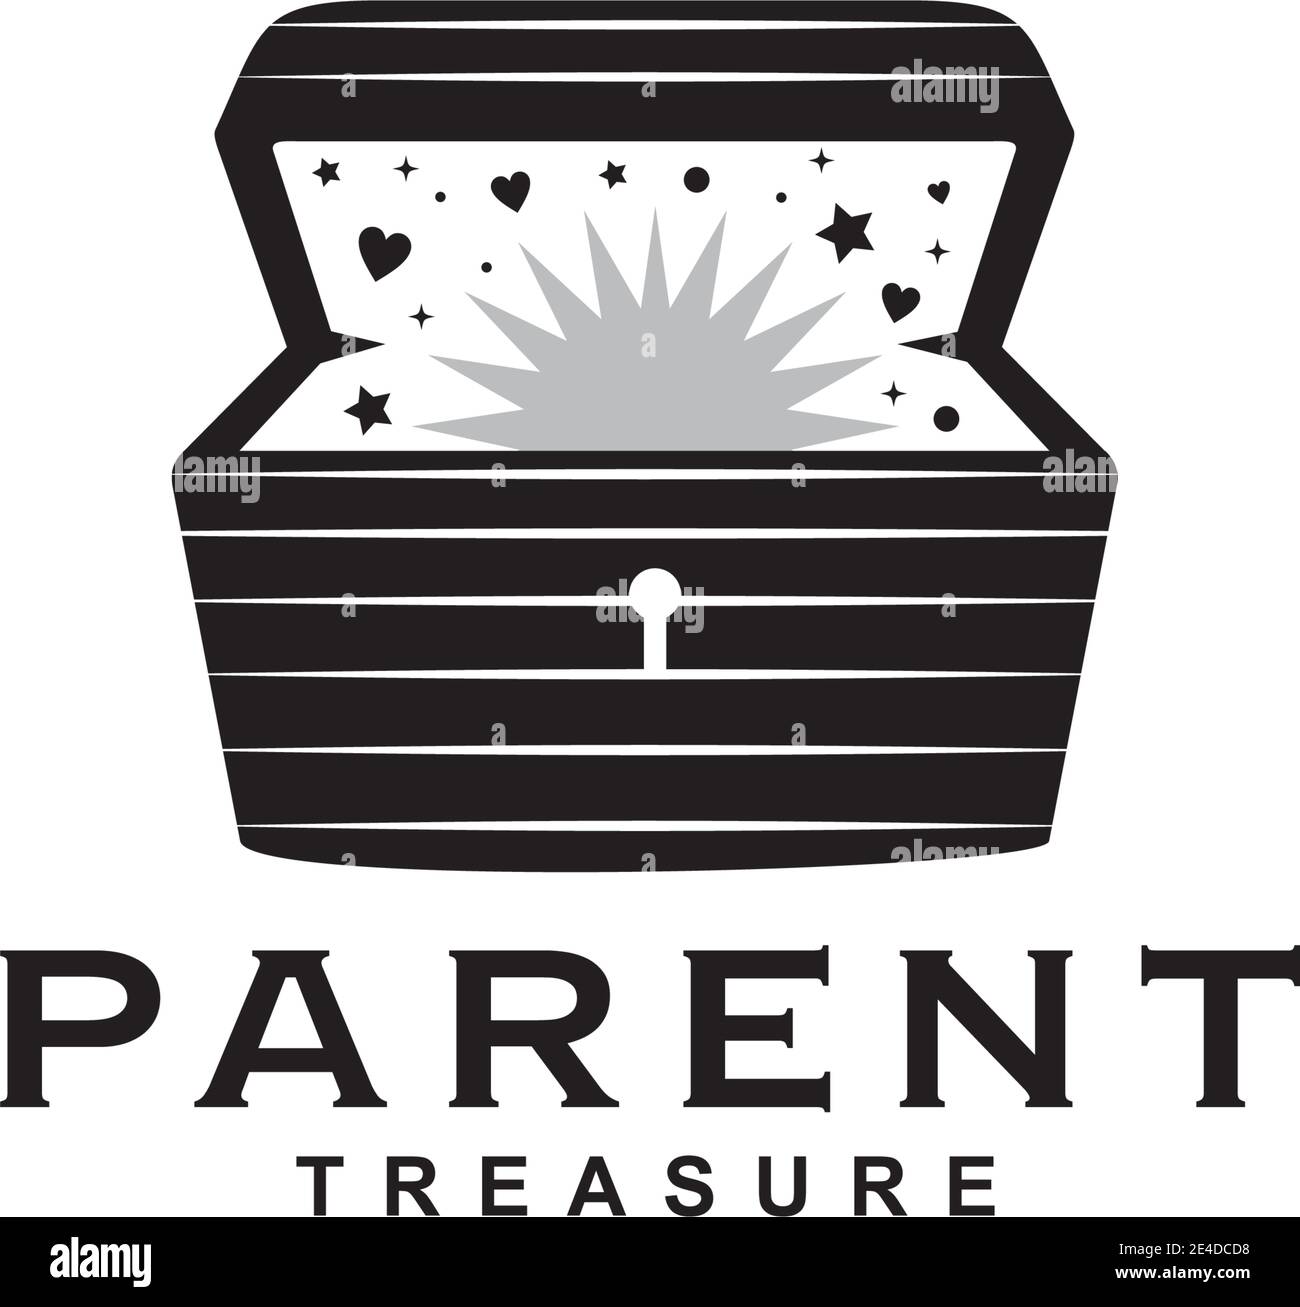 Parenting logo design with treasure chest icon template Stock Vector